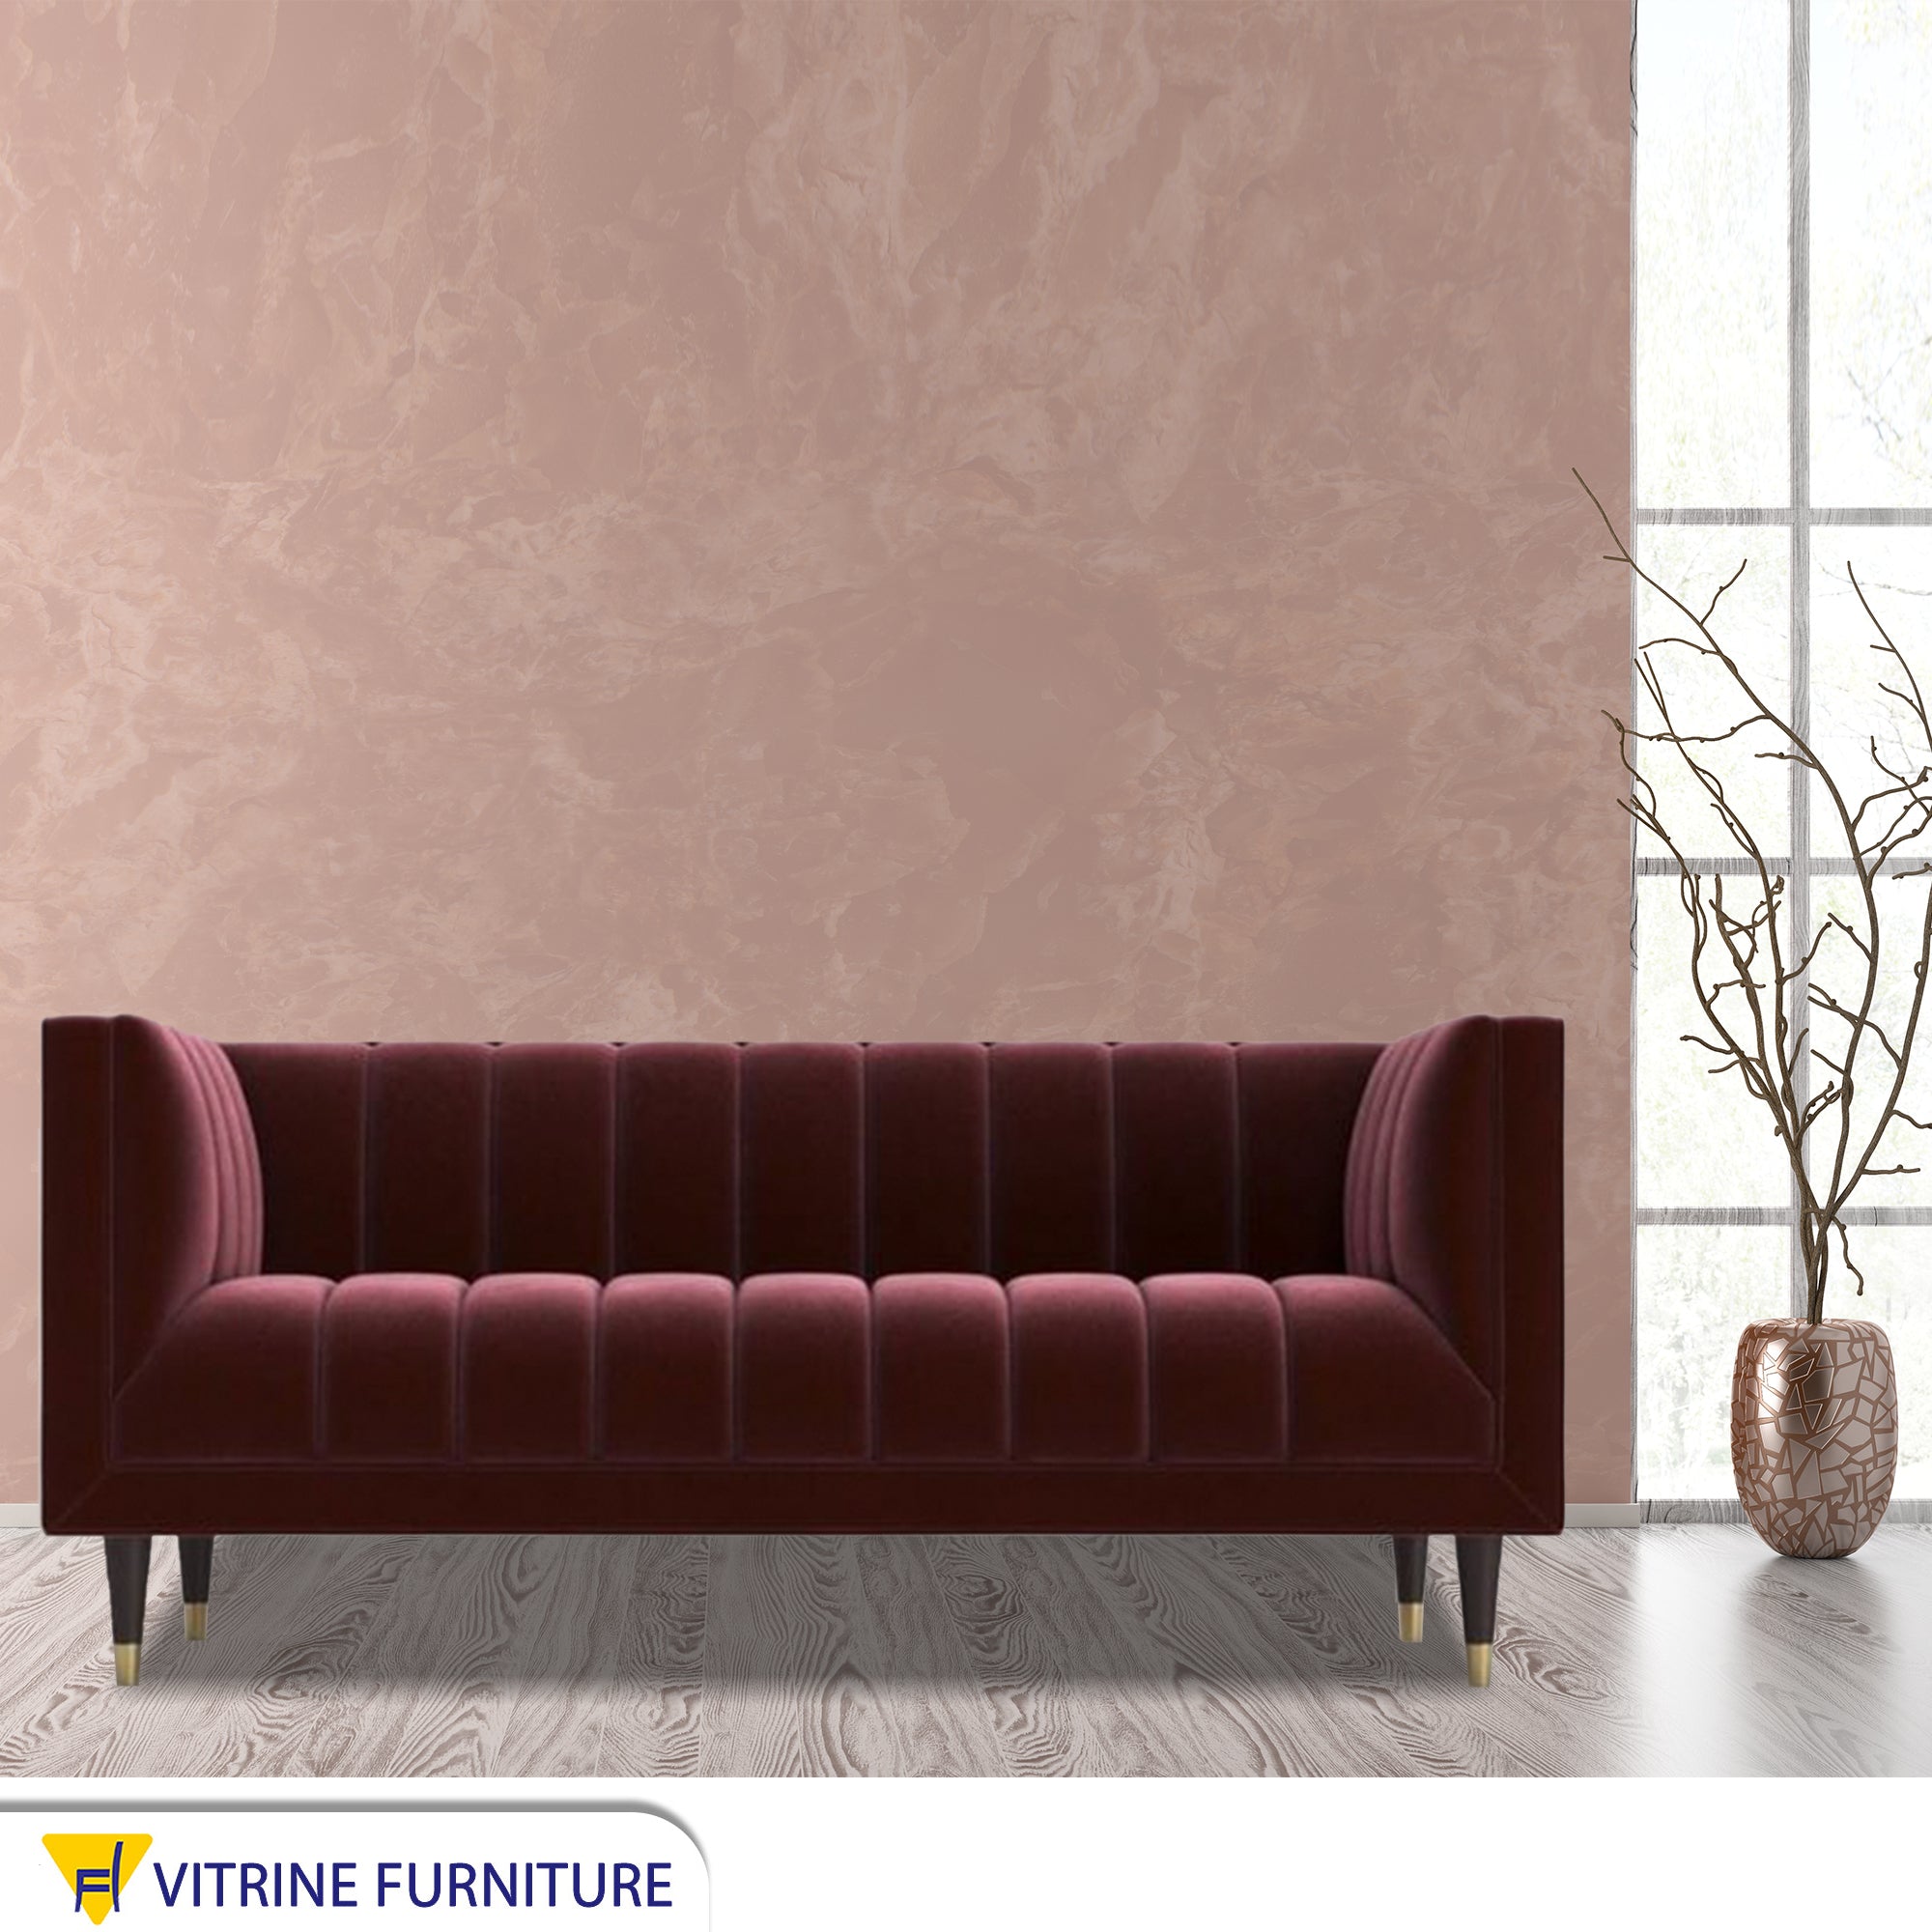 A sofa in a burgundy color with recessed lines on the back and the base